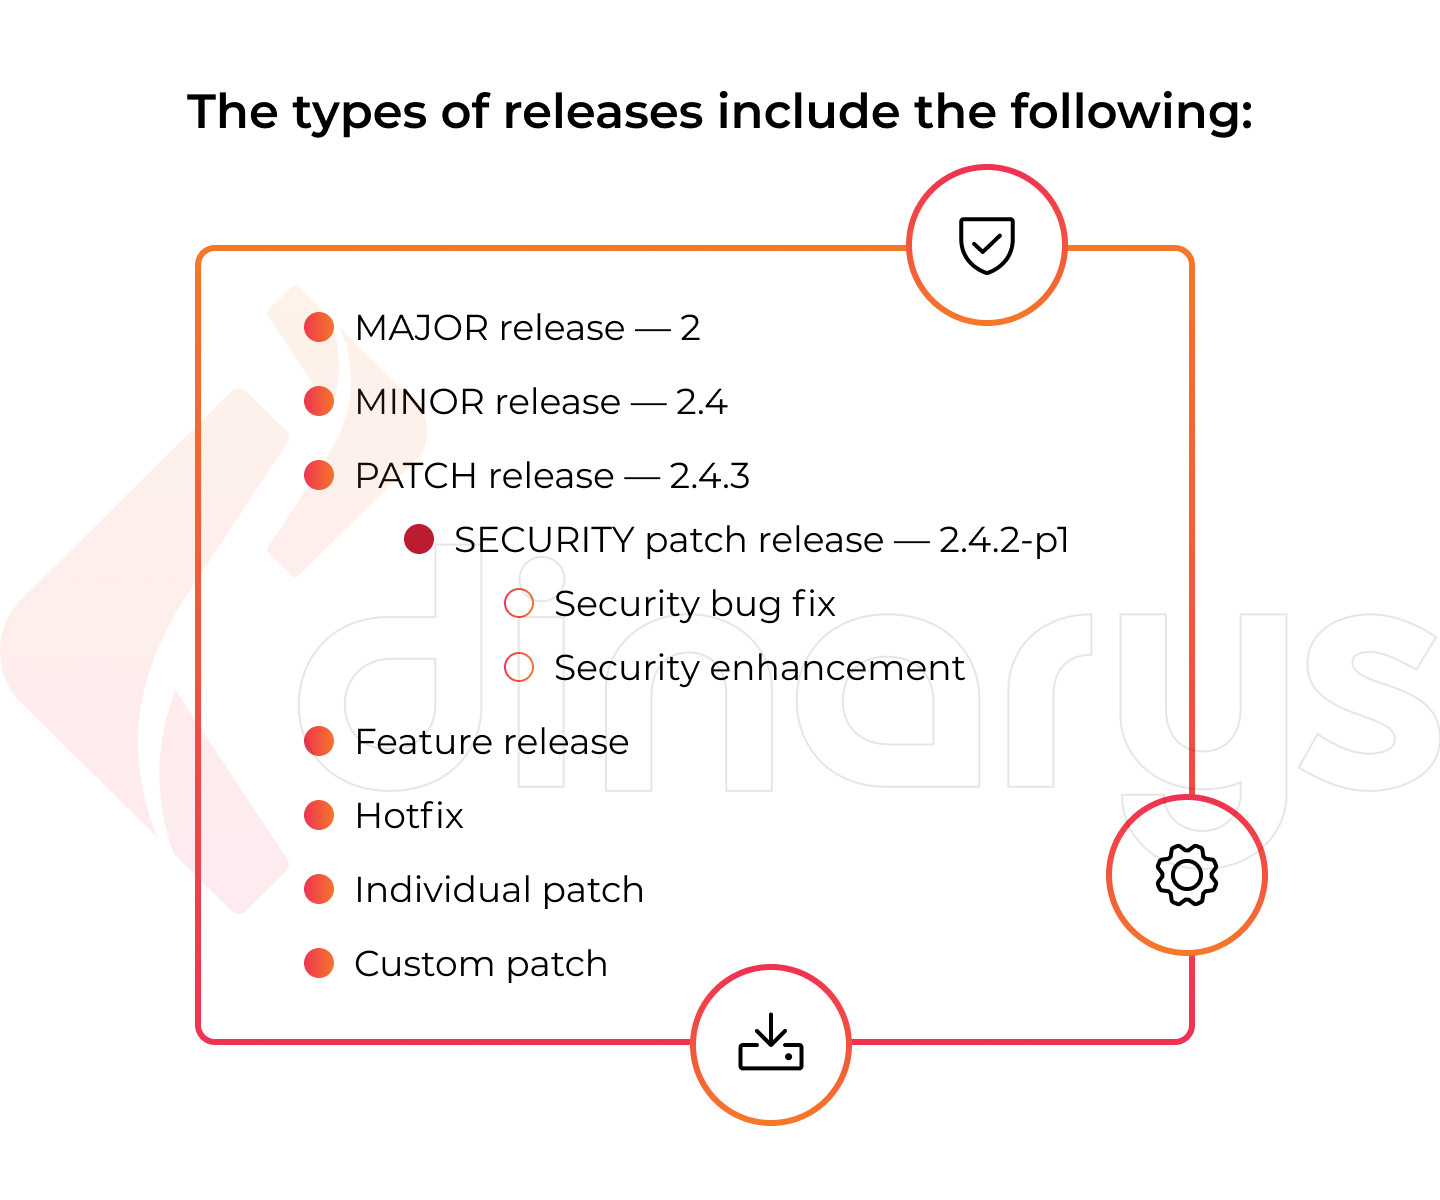 The types of releases include the following